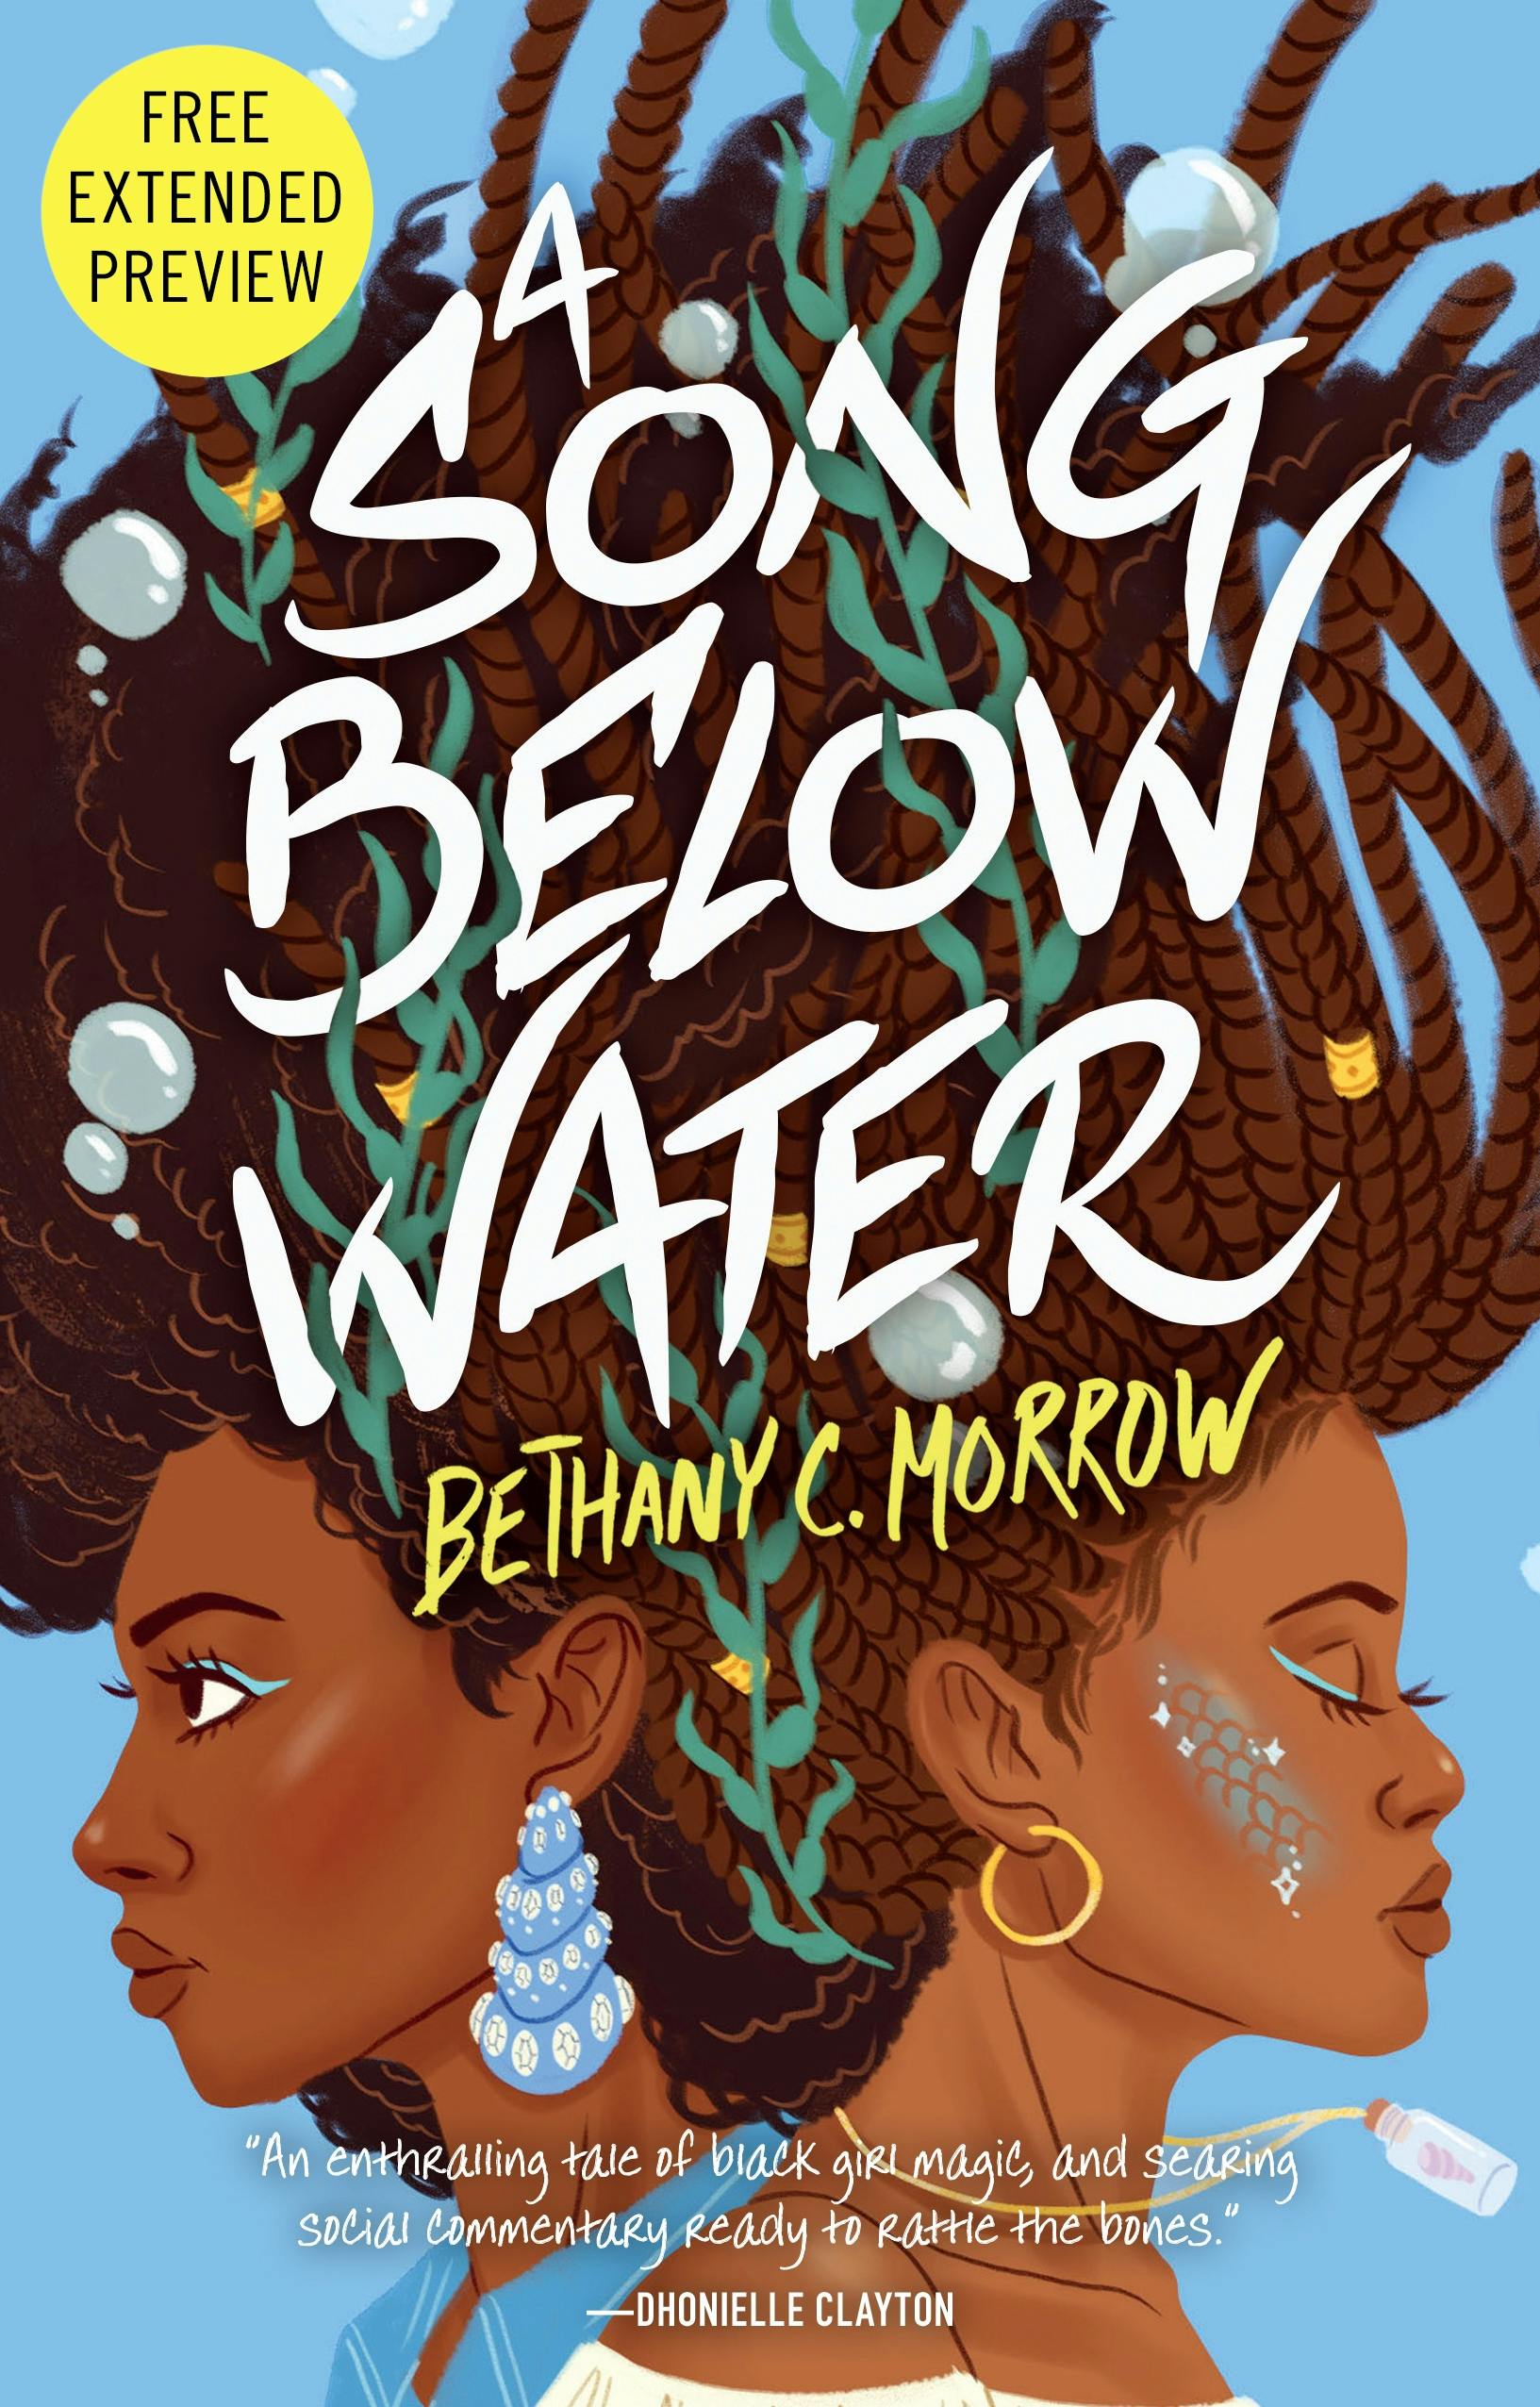 Cover for the book titled as: A Song Below Water Sneak Peek